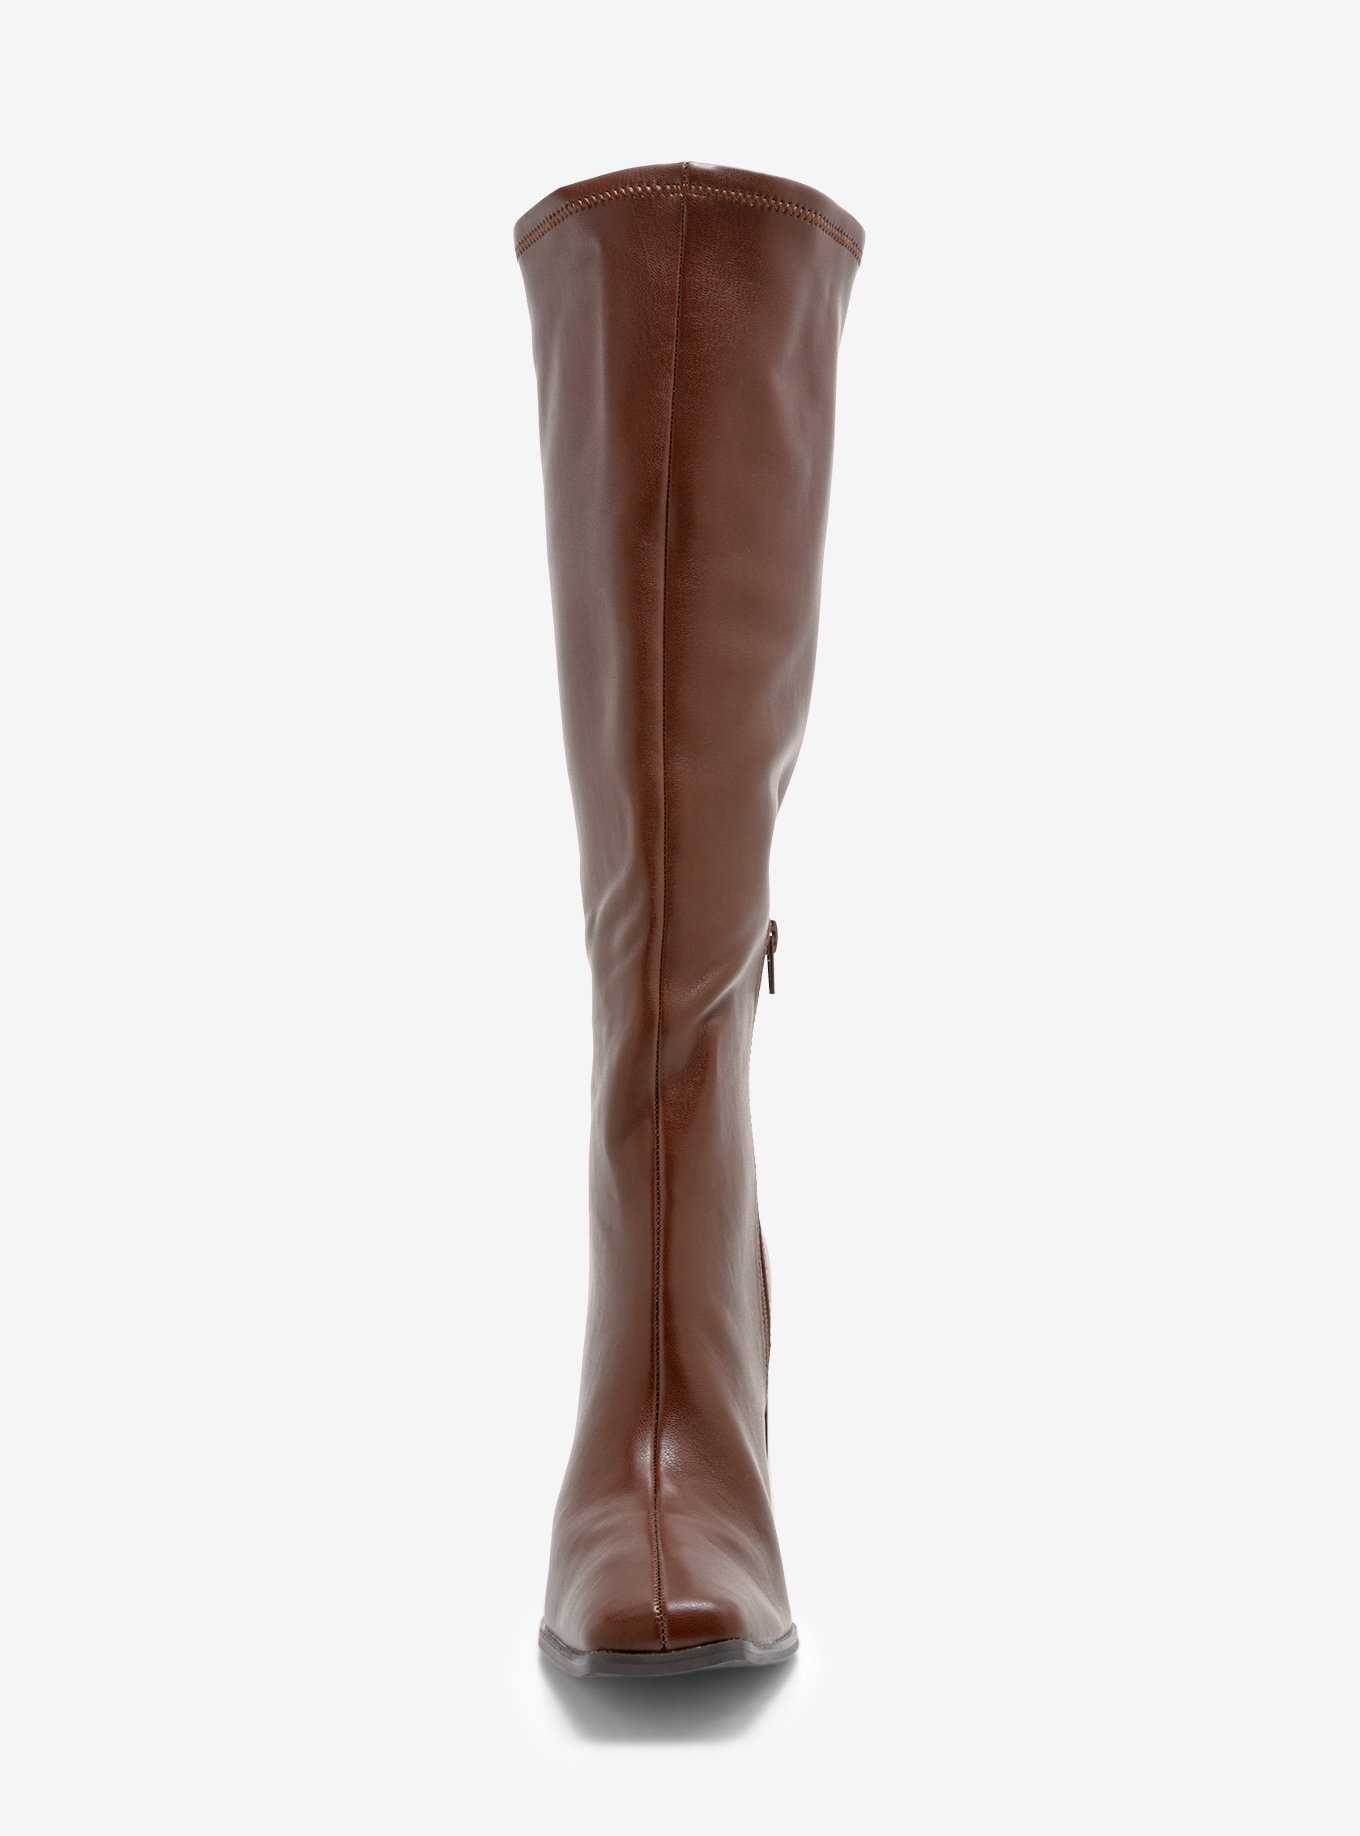 Chinese Laundry Brown Faux Leather Knee-High Boots, , hi-res